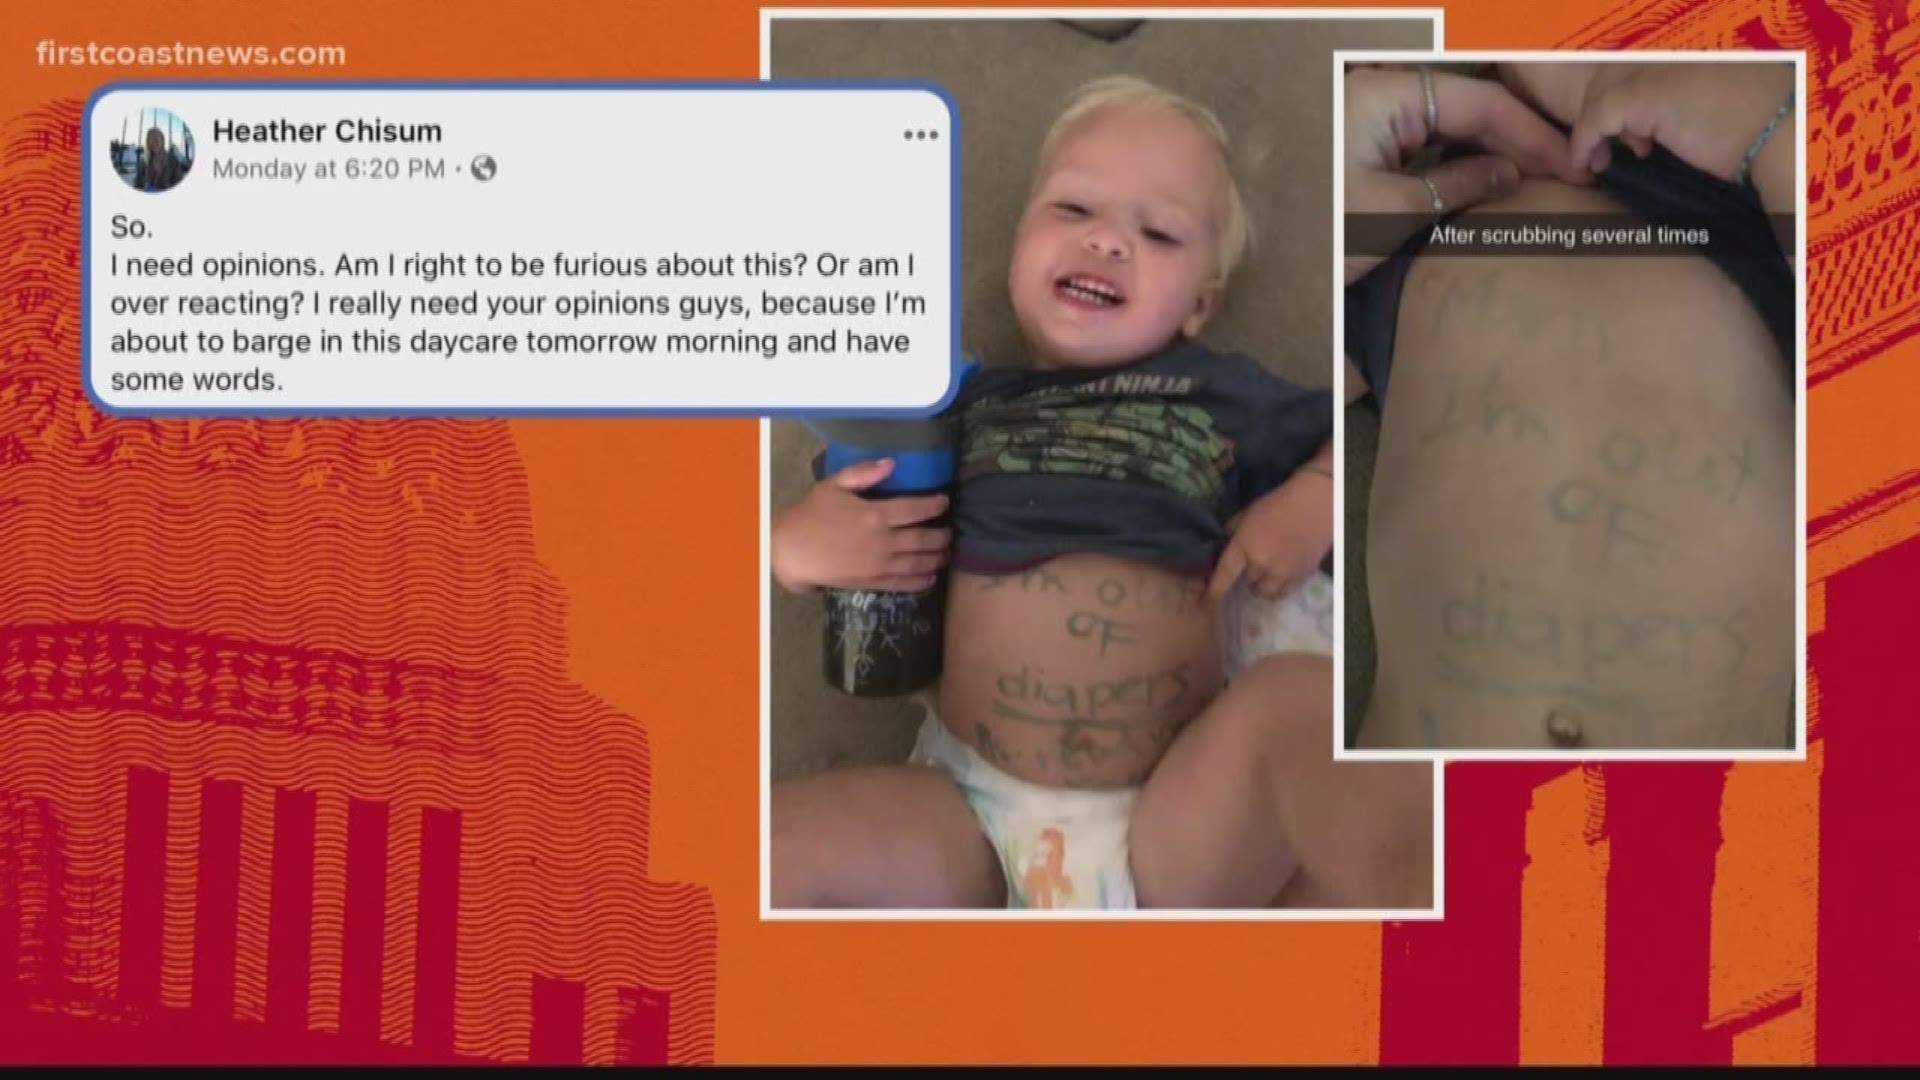 A teacher in Florida has been fired after allegedly writing on a child's stomach.